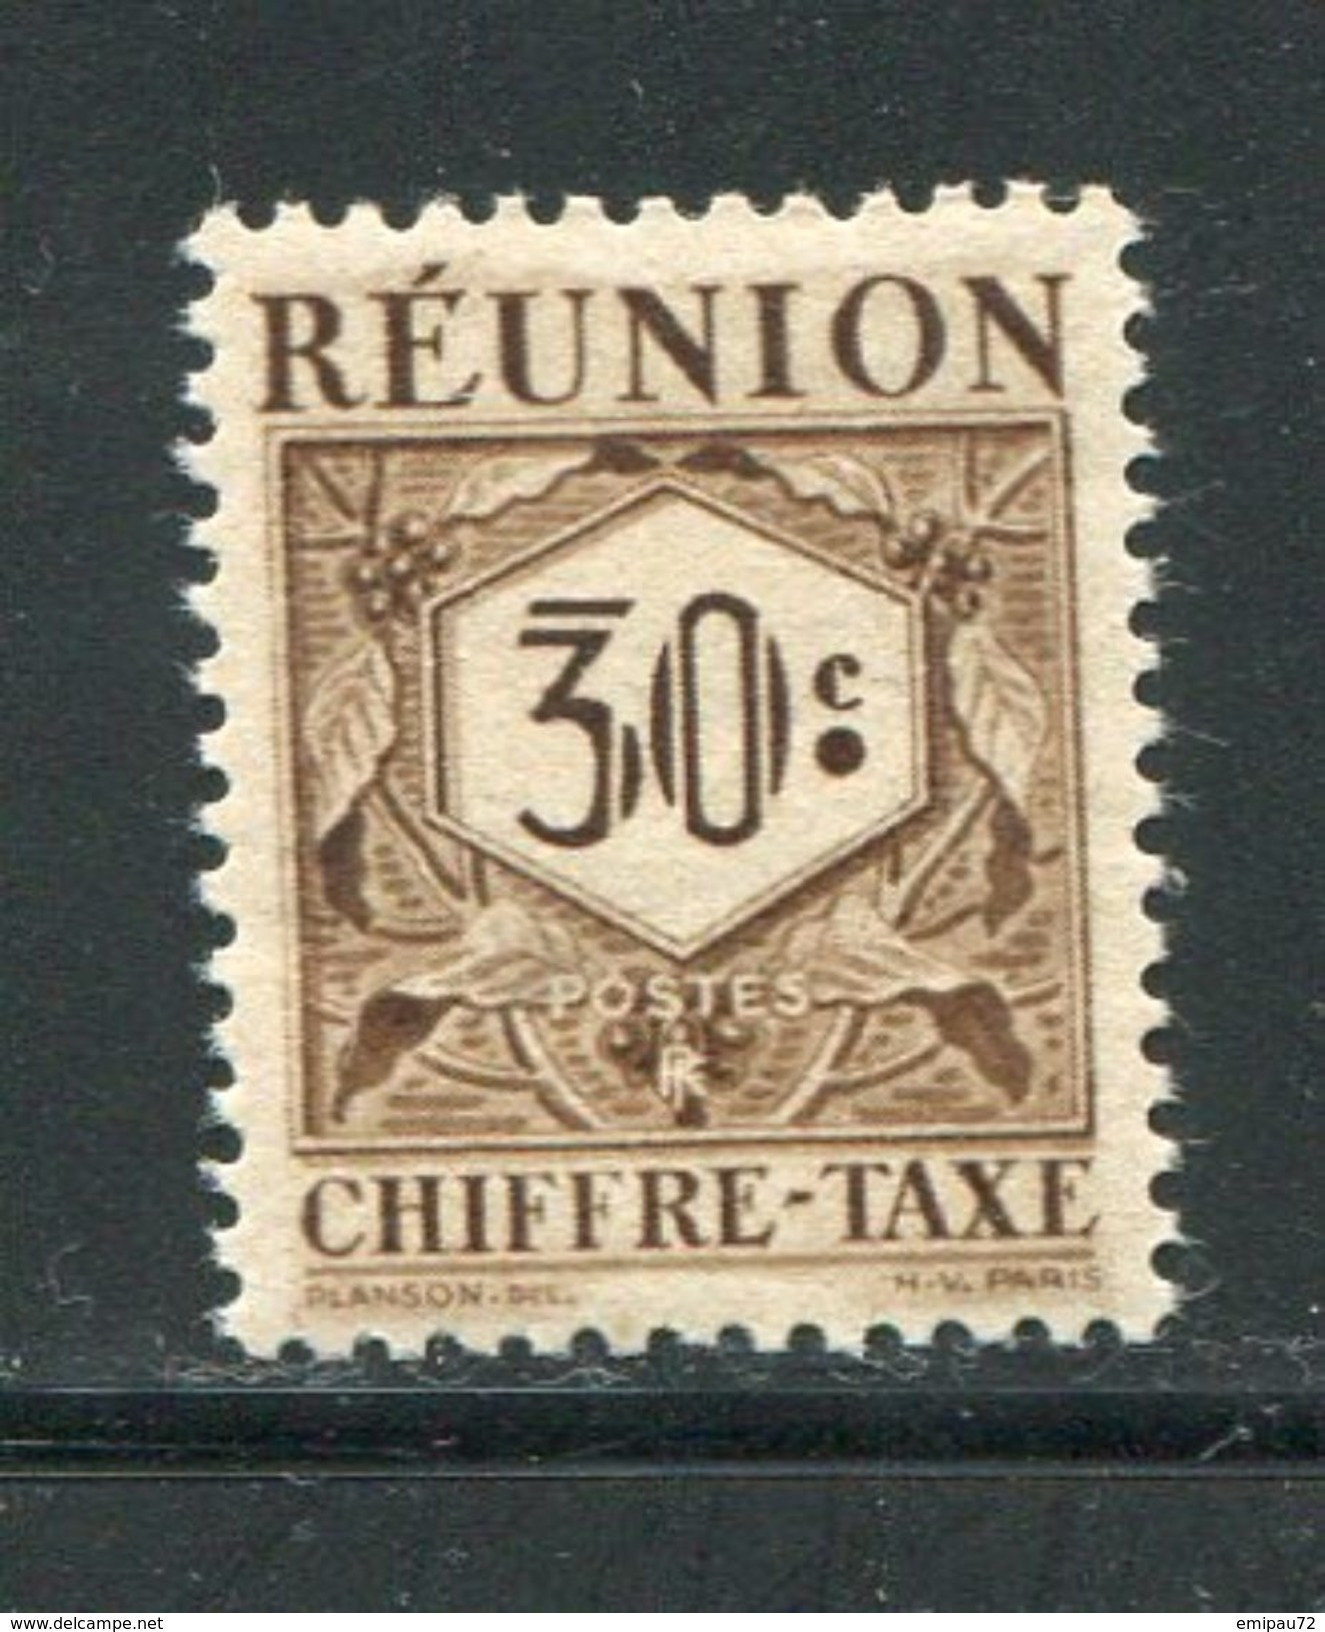 REUNION- Taxe Y&T N°27- Neuf Avec Charnière * - Timbres-taxe